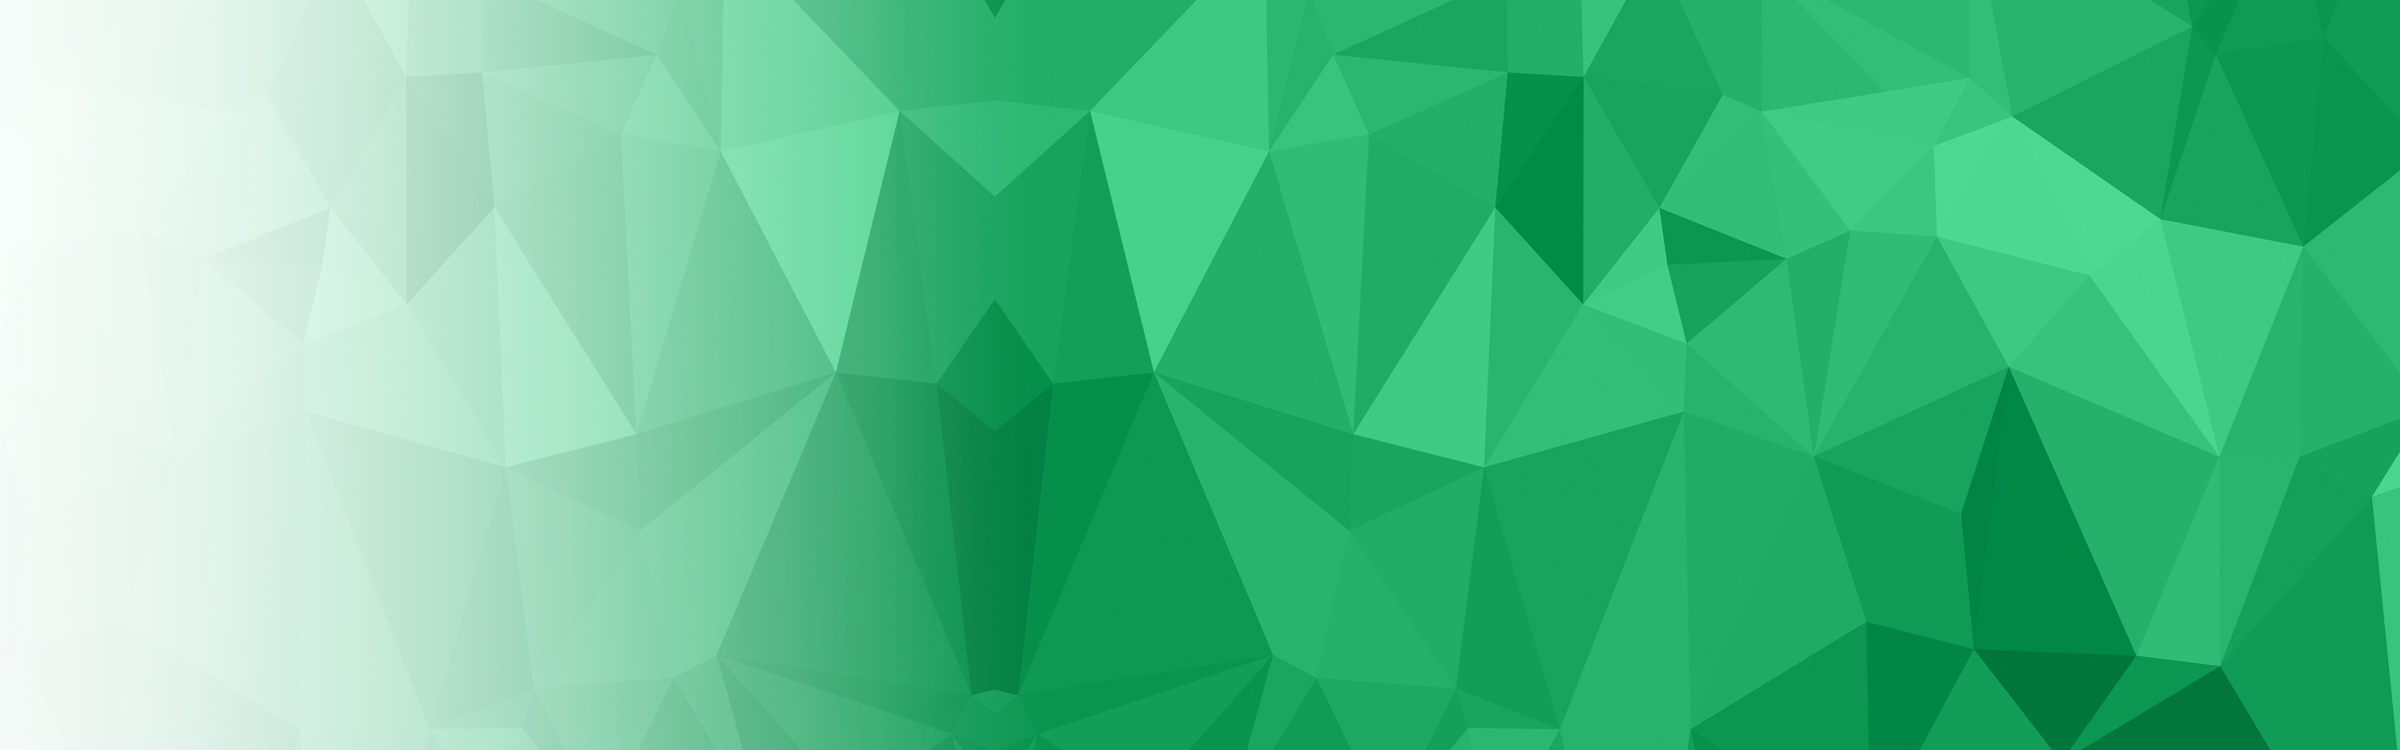 Banner with green polygons by Südpack